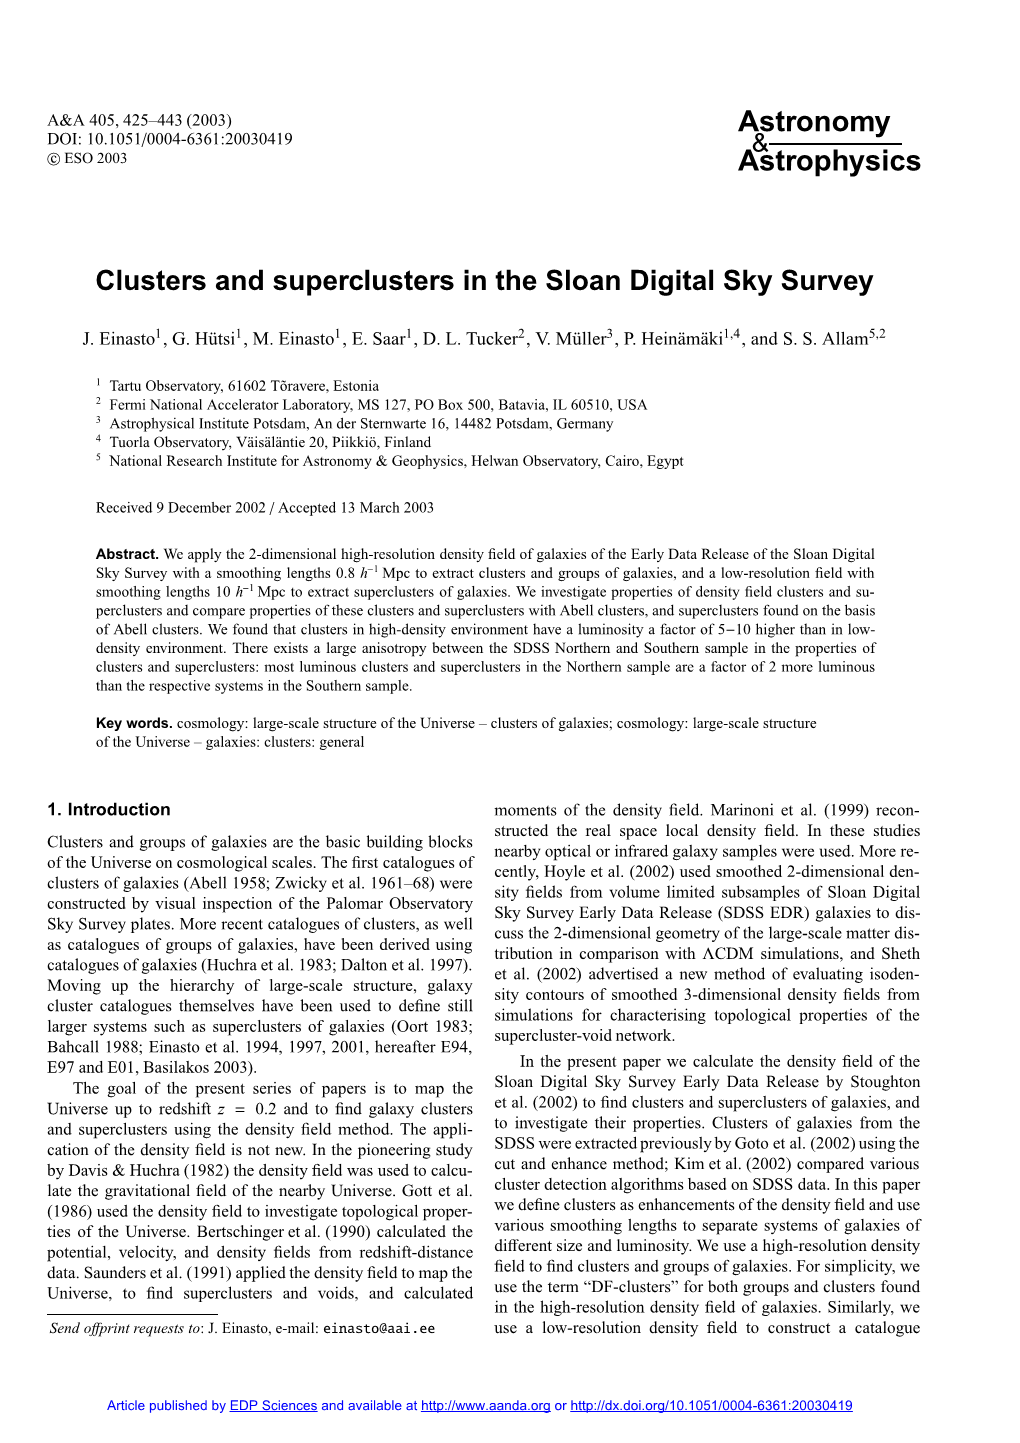 Clusters and Superclusters in the Sloan Digital Sky Survey